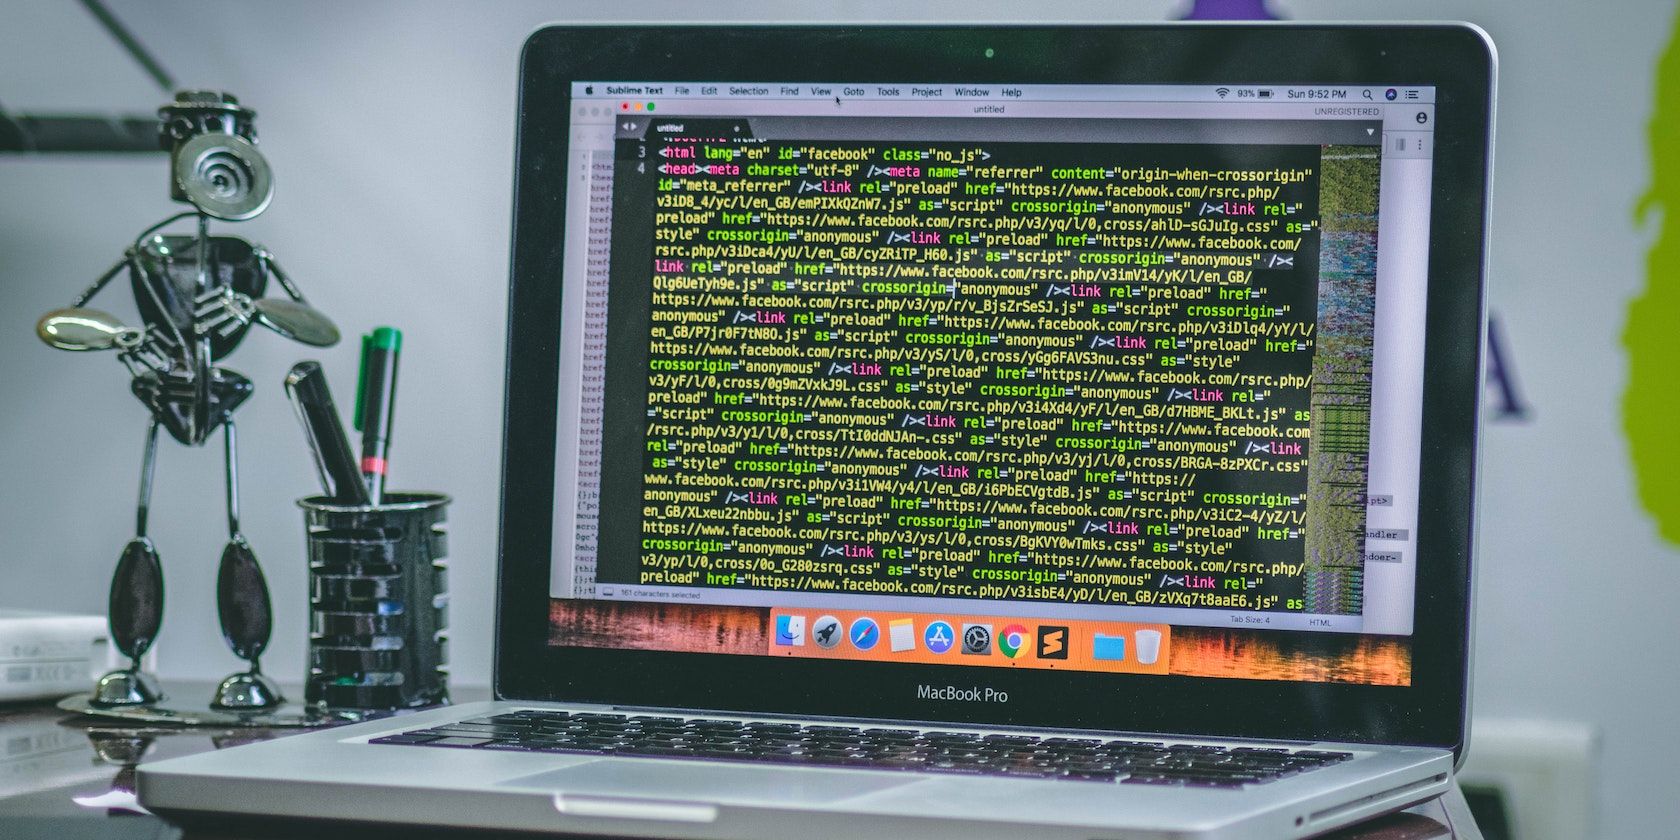 MacBook showing lines of code on its screen